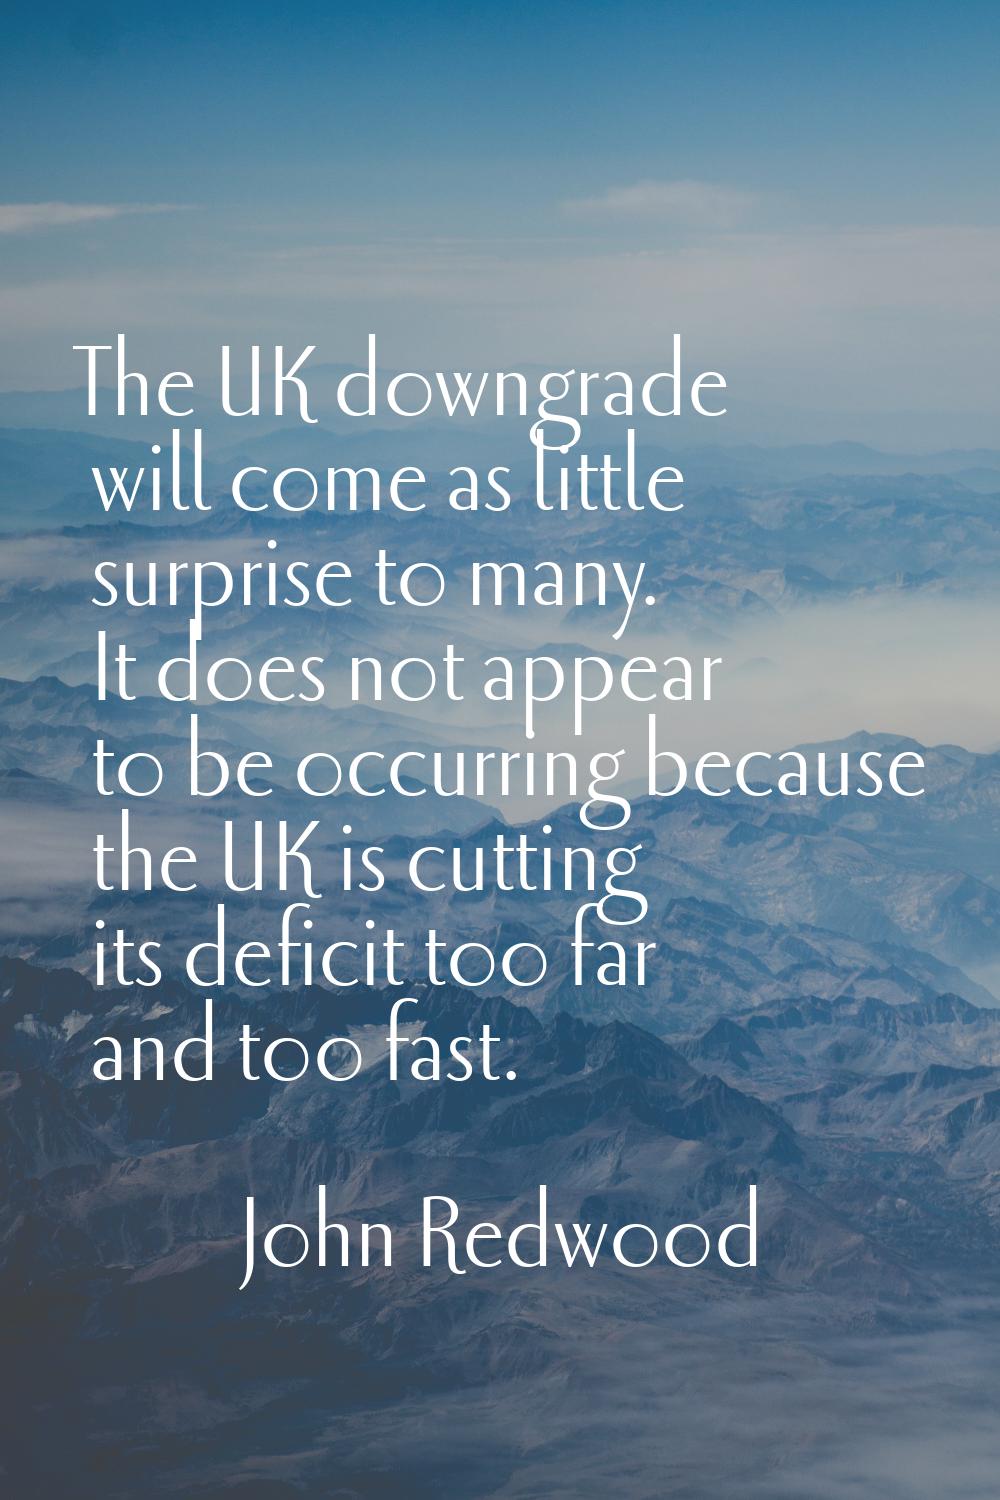 The UK downgrade will come as little surprise to many. It does not appear to be occurring because t